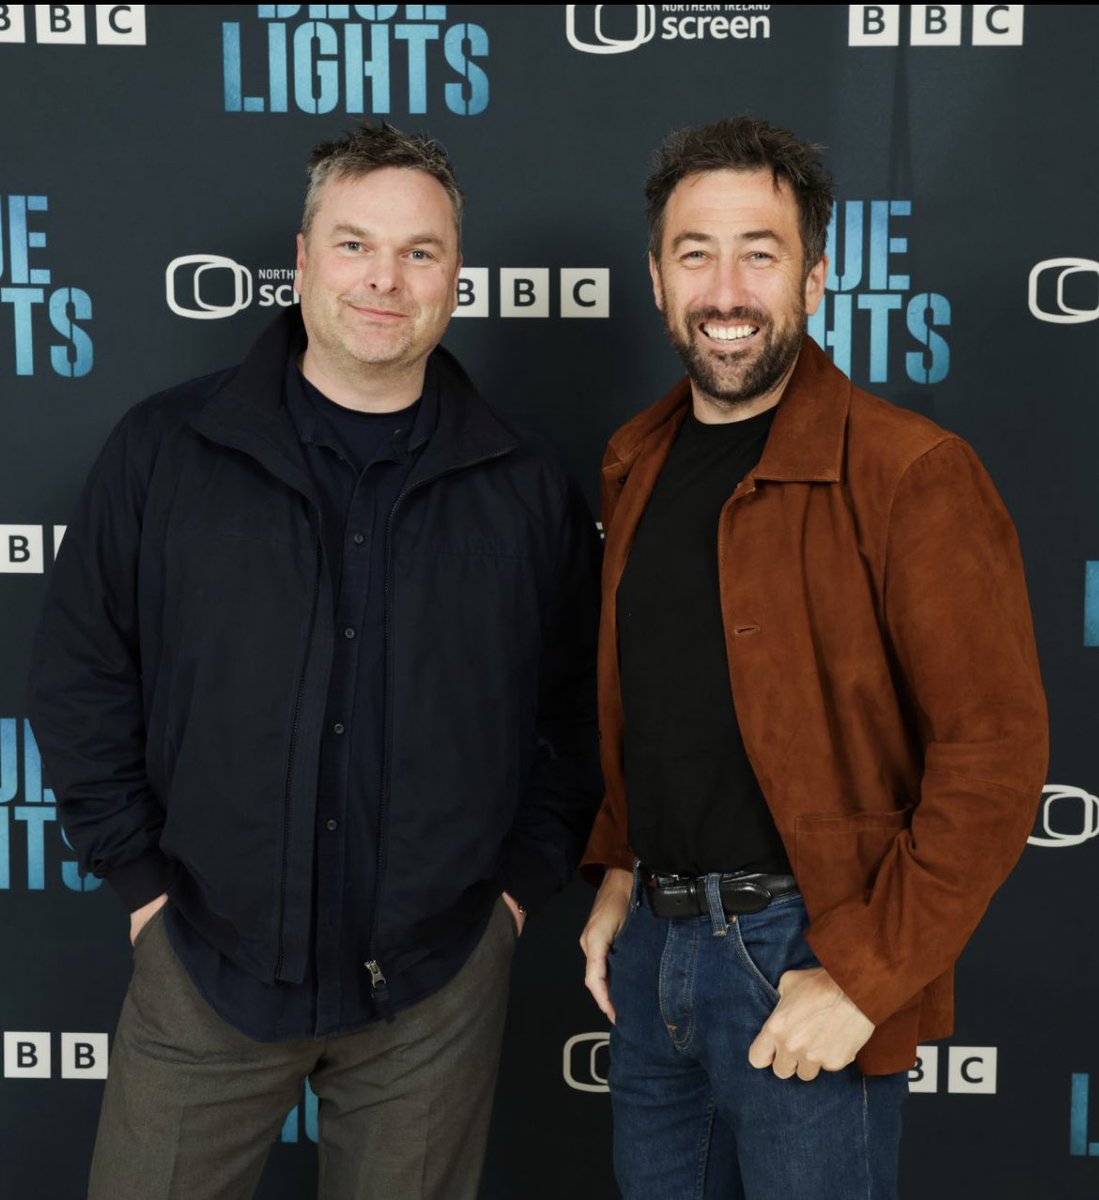 #ProudWifey - hats off to my husband Adam Patterson and Declan Lawn for writing, directing and exec producing the second series of the brilliant TV drama #BlueLights 👏 Tune in Monday @BBCOne 9pm for series two! 📺